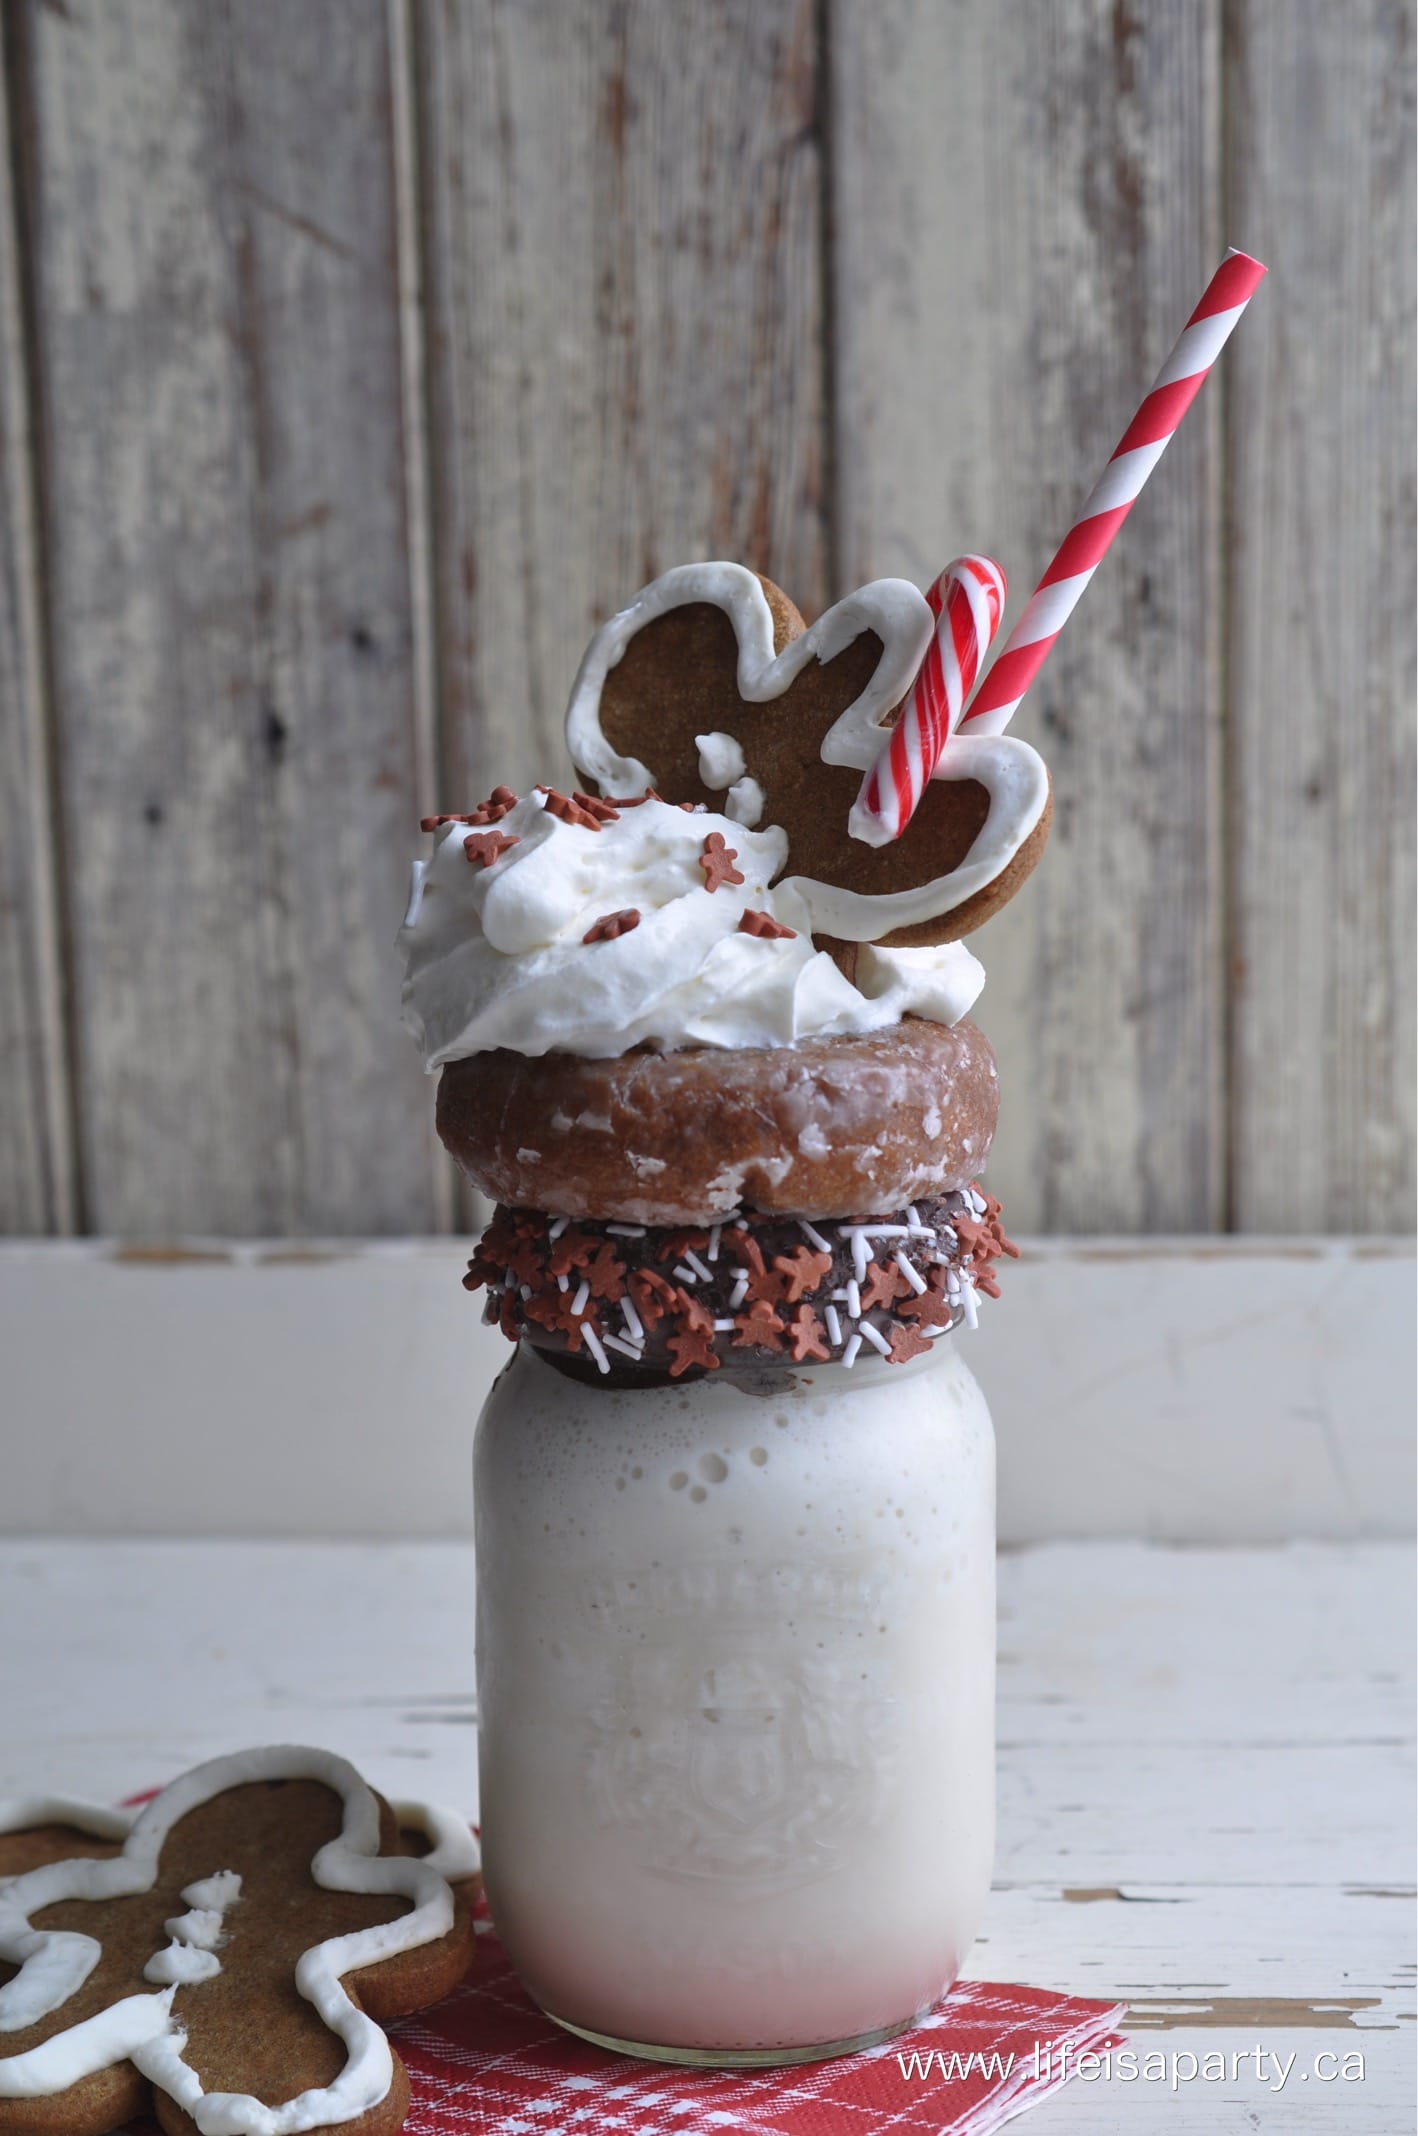 Gingerbread Extreme Milkshake with gingerbread donuts, whip cream, sprinkles, gingerbread man, and candy cane